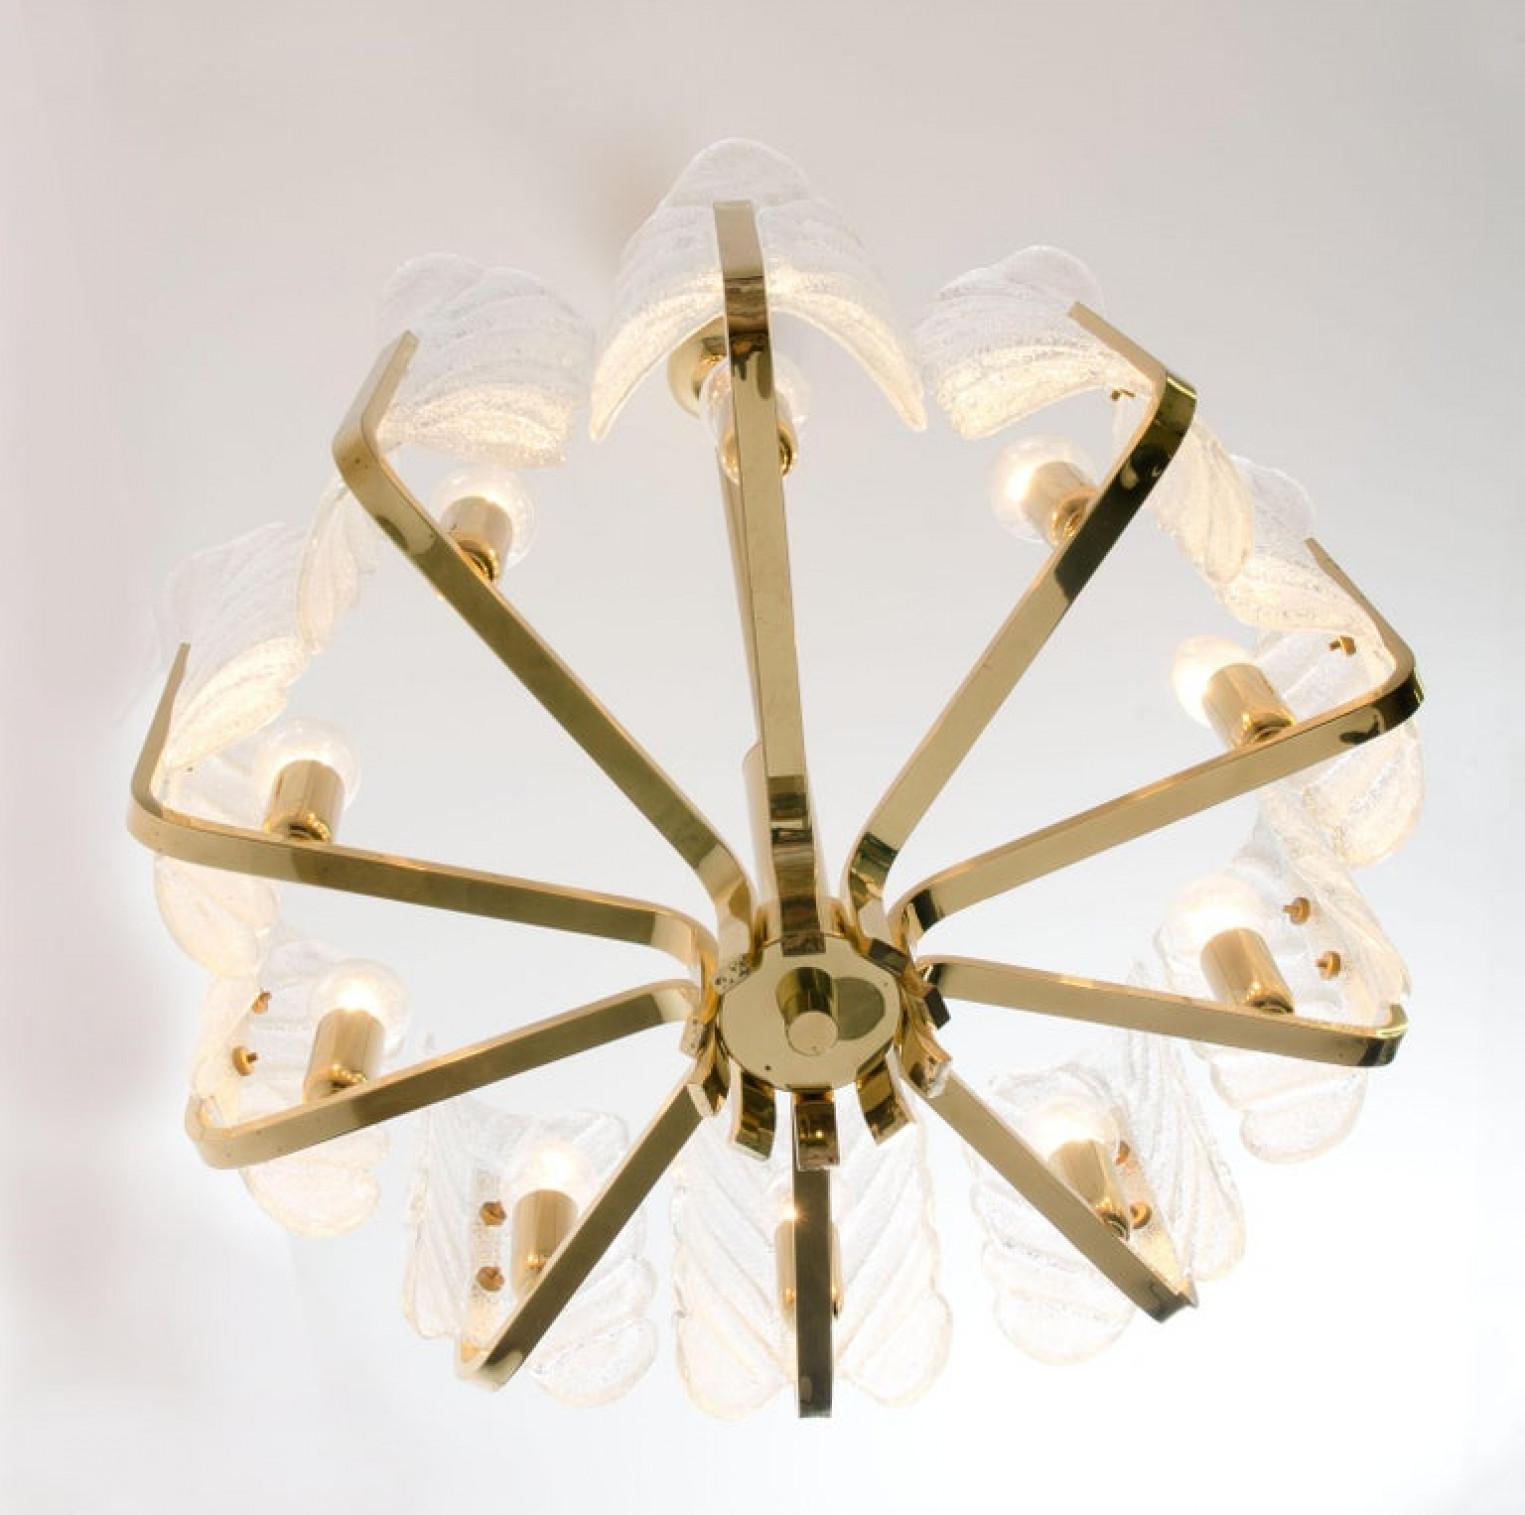 One of the Six Large Fagerlund Glass Leaves Brass Chandelier by Orrefors, 1960s For Sale 2